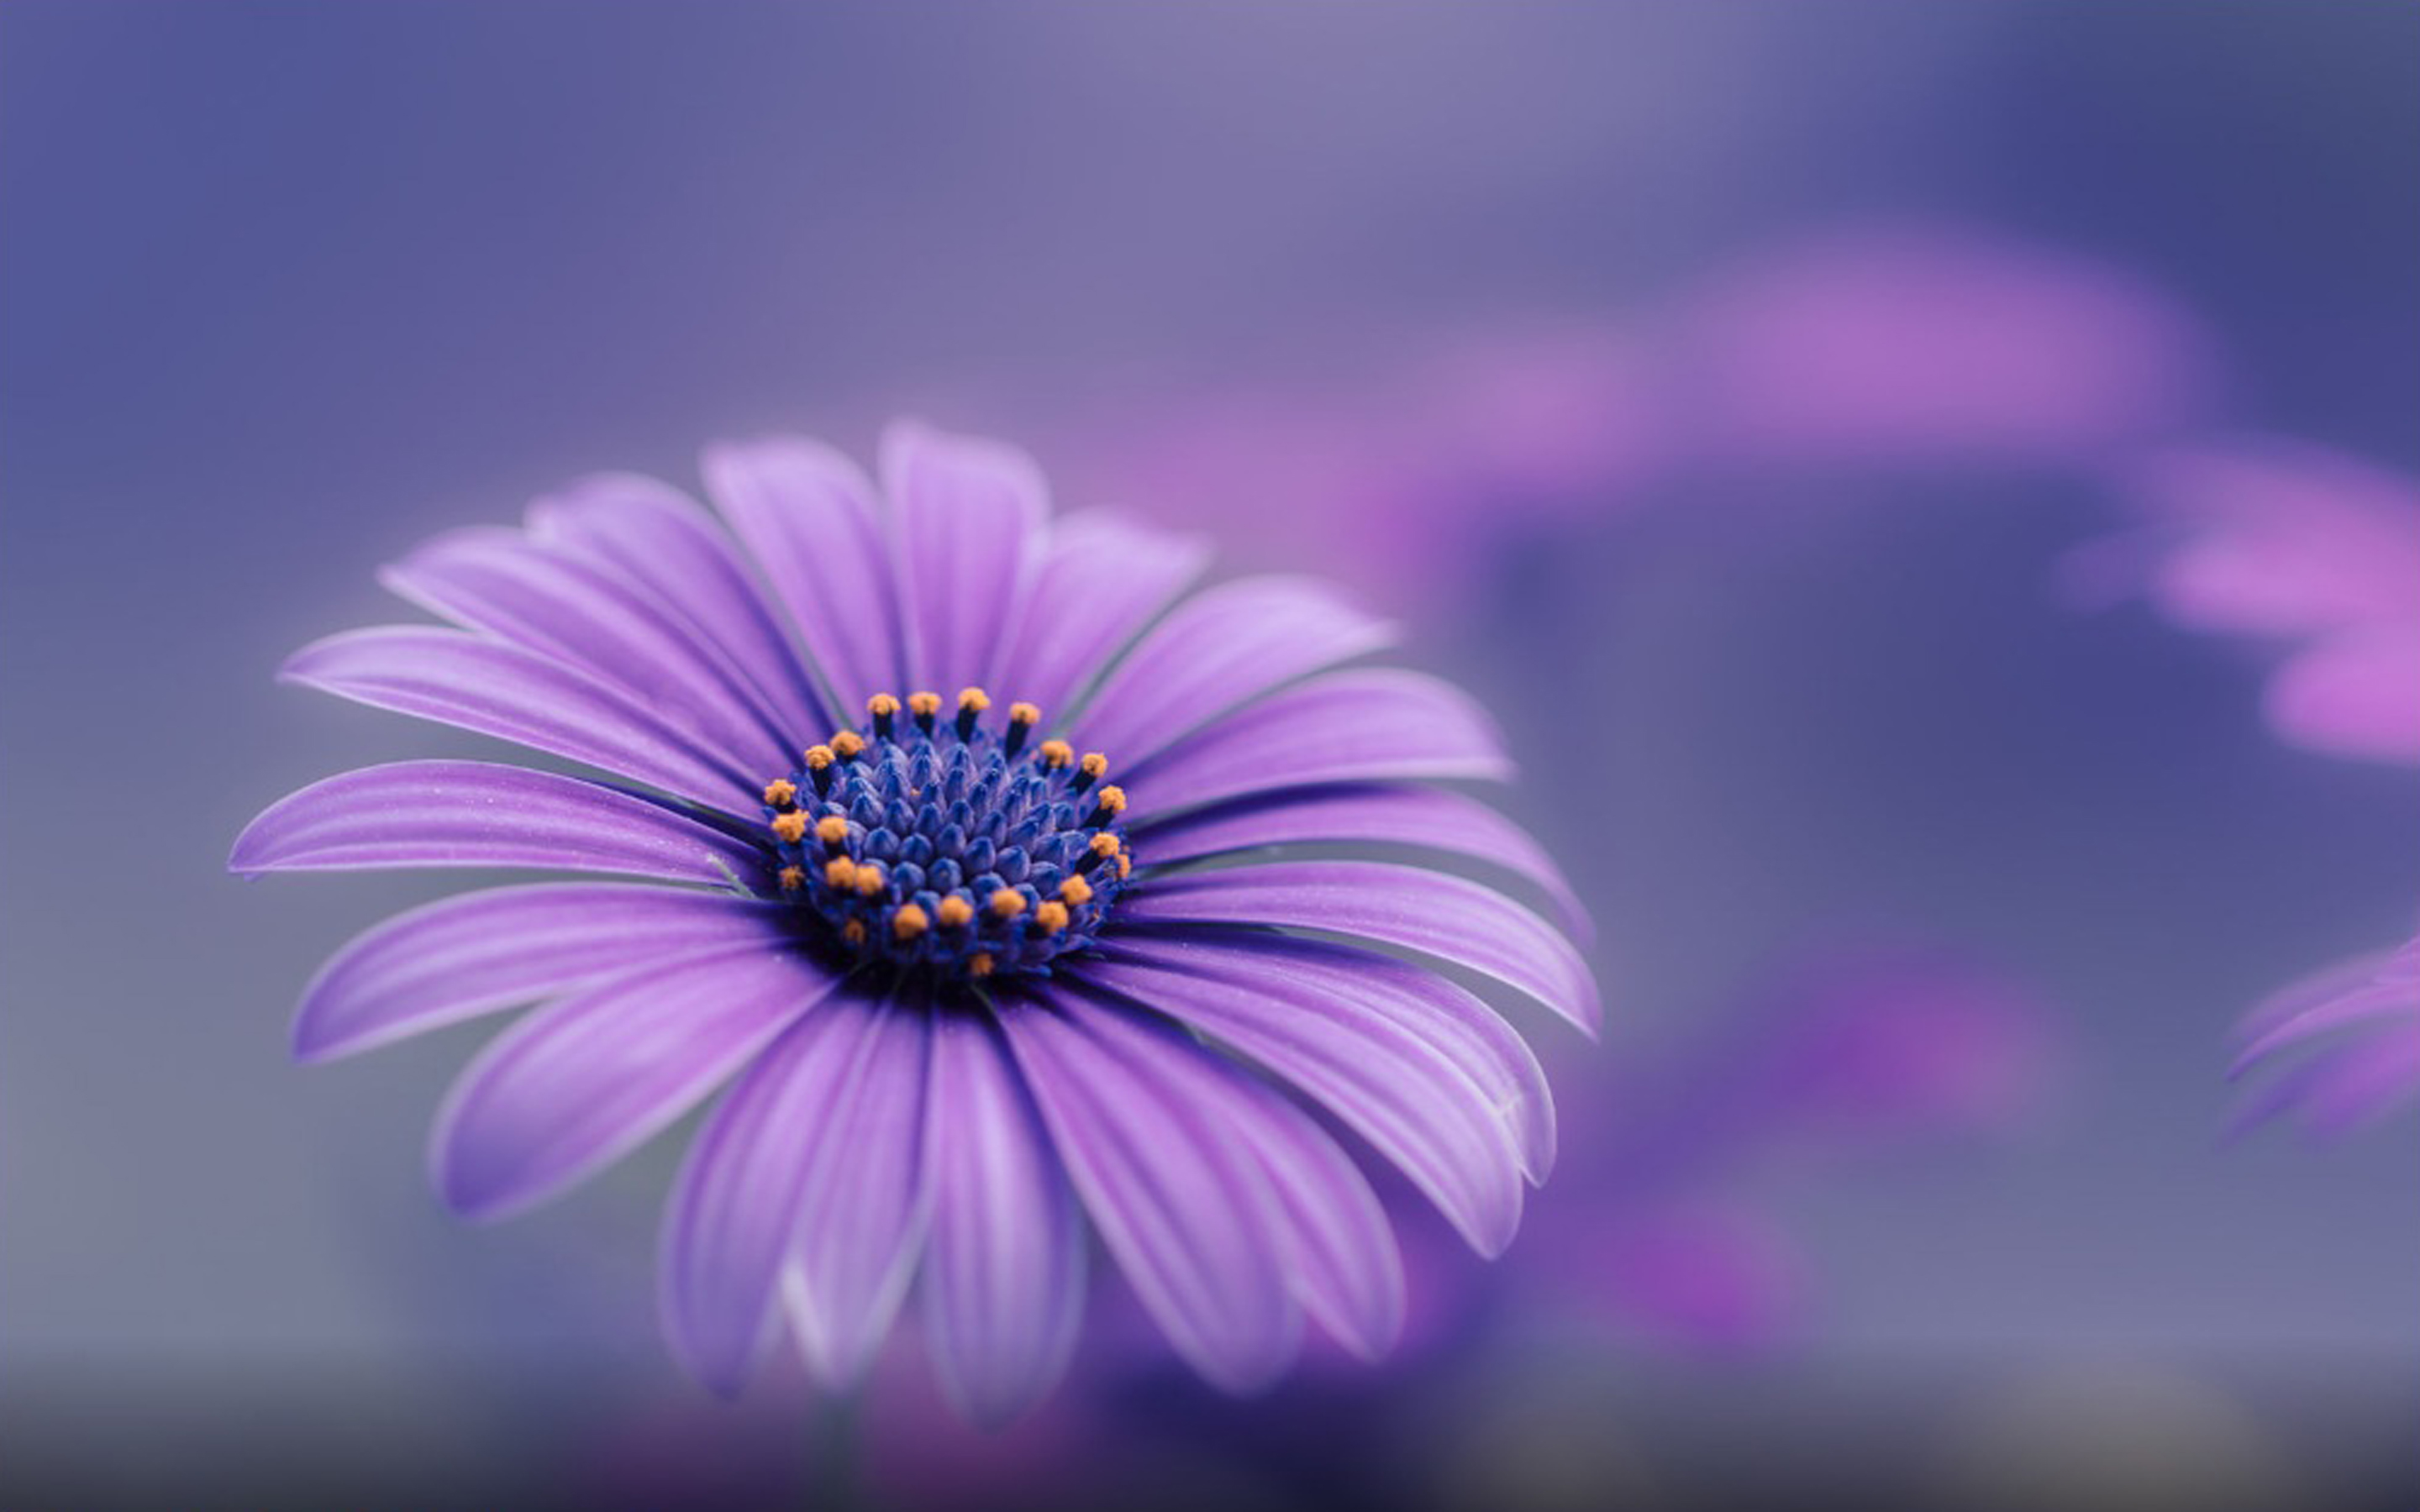 Purple Blue Flower Hd Wallpapers For Mobile Phones And Computers ...